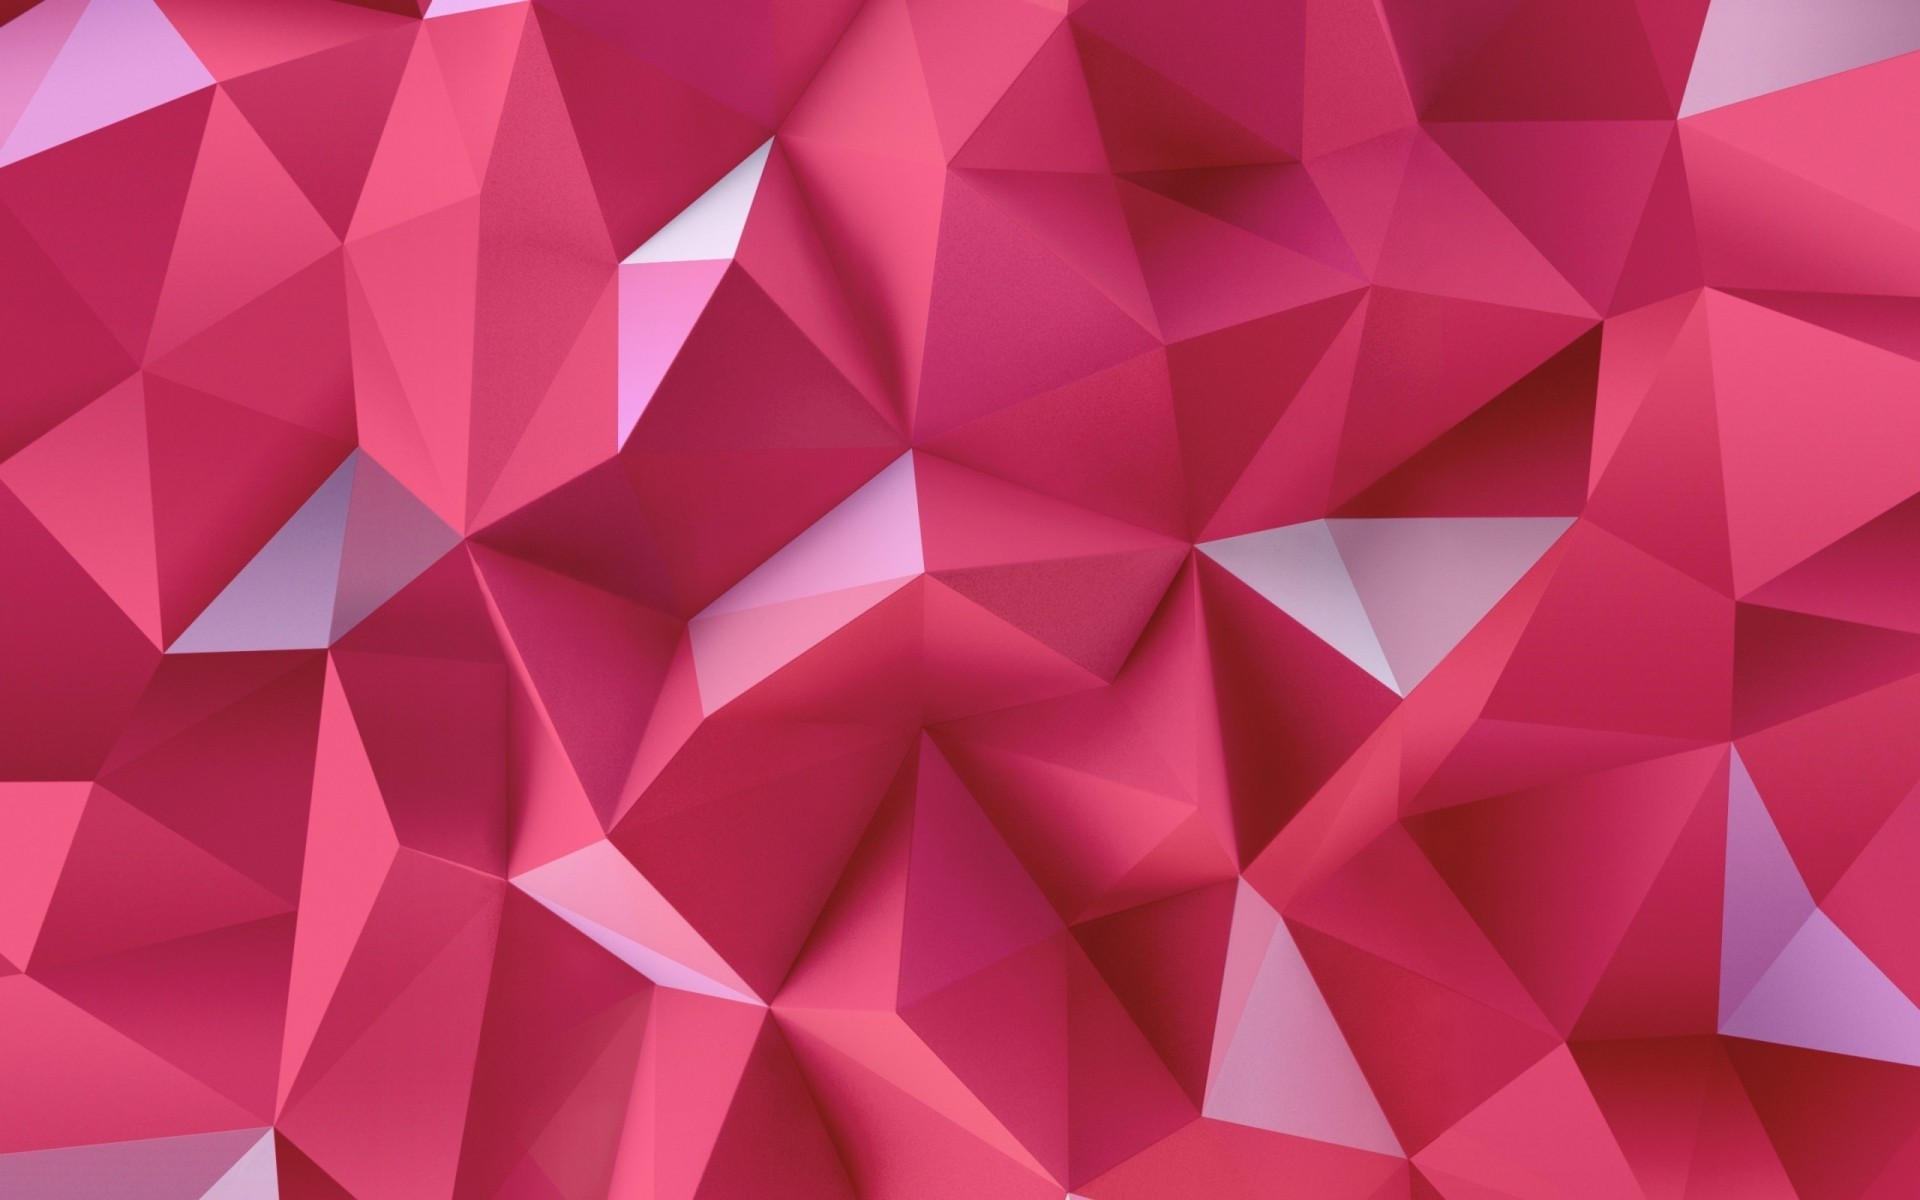 abstract triangle geometric graphic illustration origami polygon design wallpaper triangular shape image mosaic desktop background pattern template art texture modern triangles